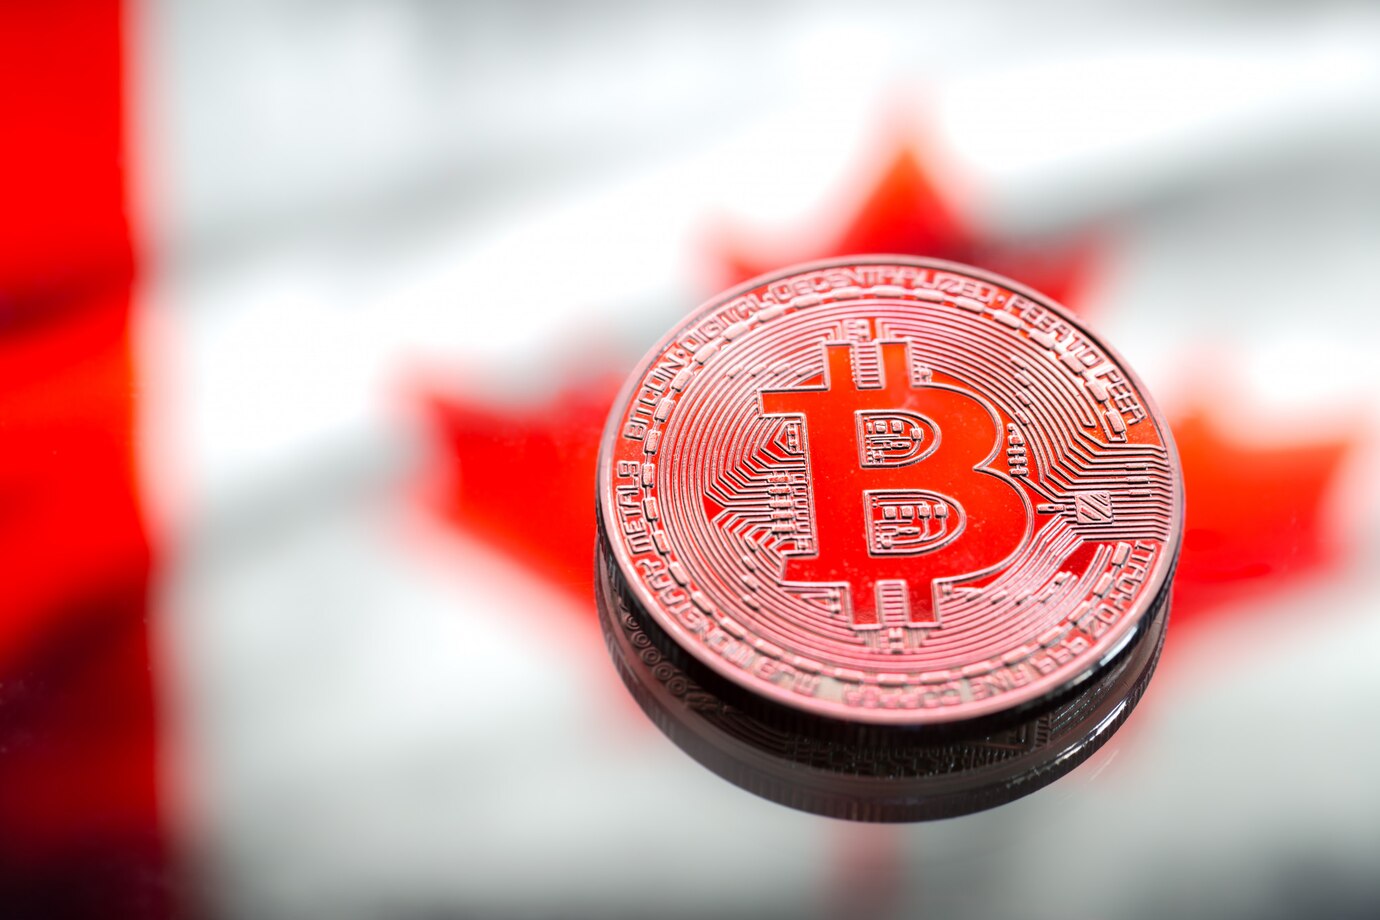 Bitcoin Heats Up in China- Growing Interest Despite Government Ban as Surging Price Fuels Social Media Buzz